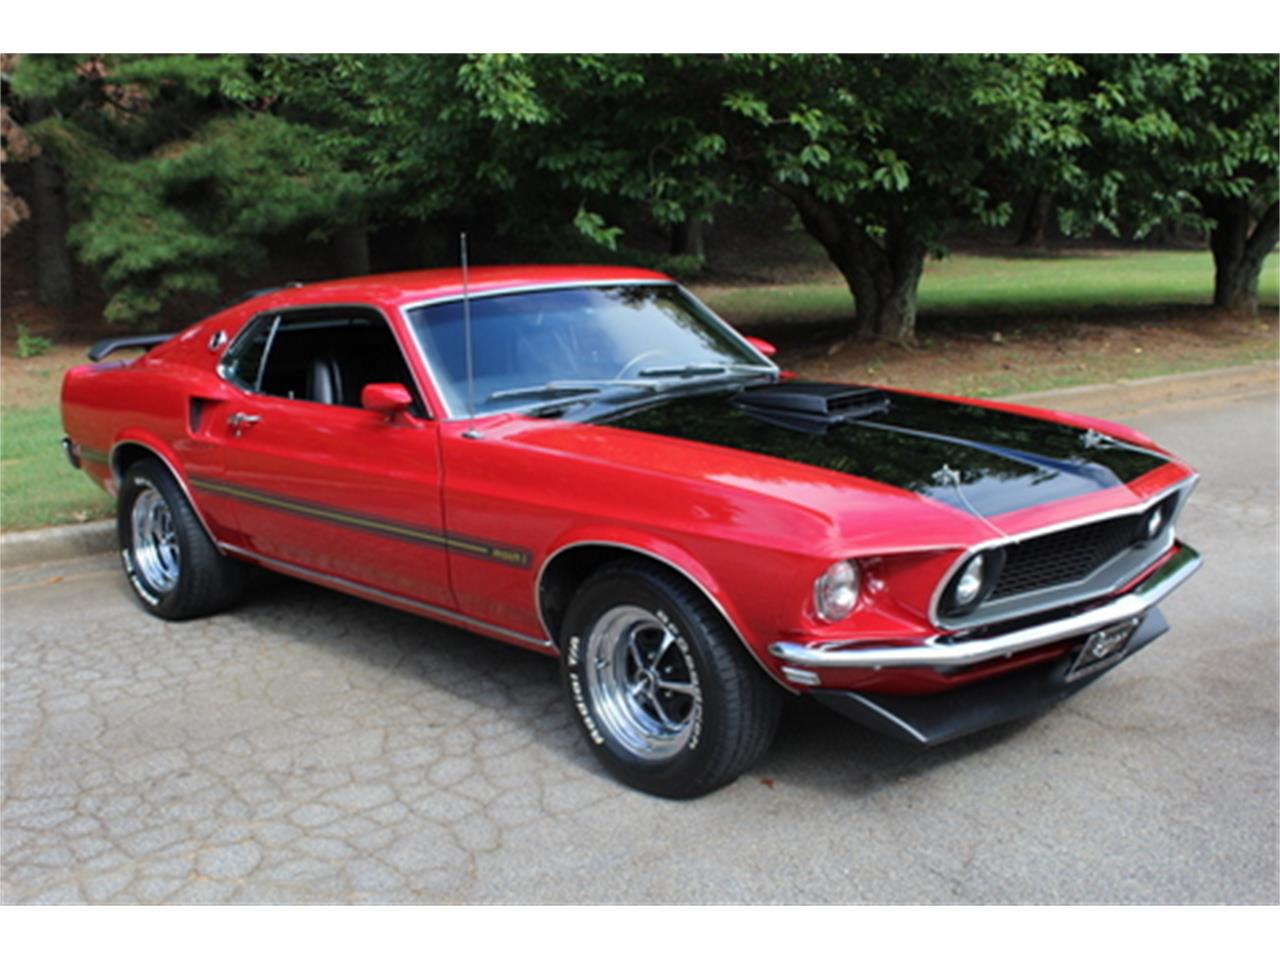 1969 Ford Mustang Mach 1 for Sale | ClassicCars.com | CC-1143083